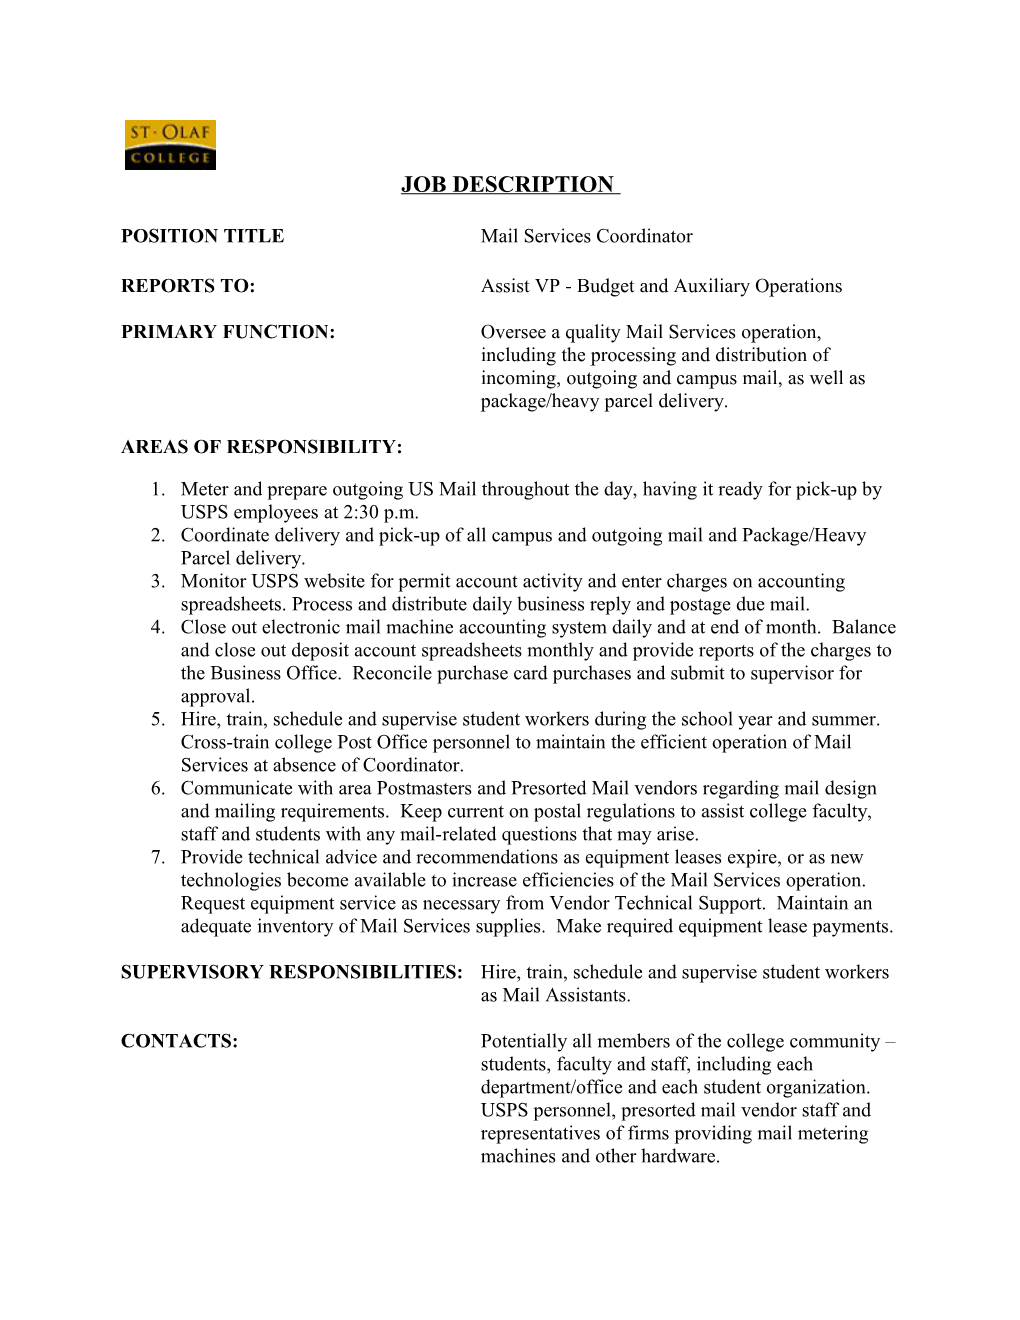 Instructions for Writing the Job Description s1